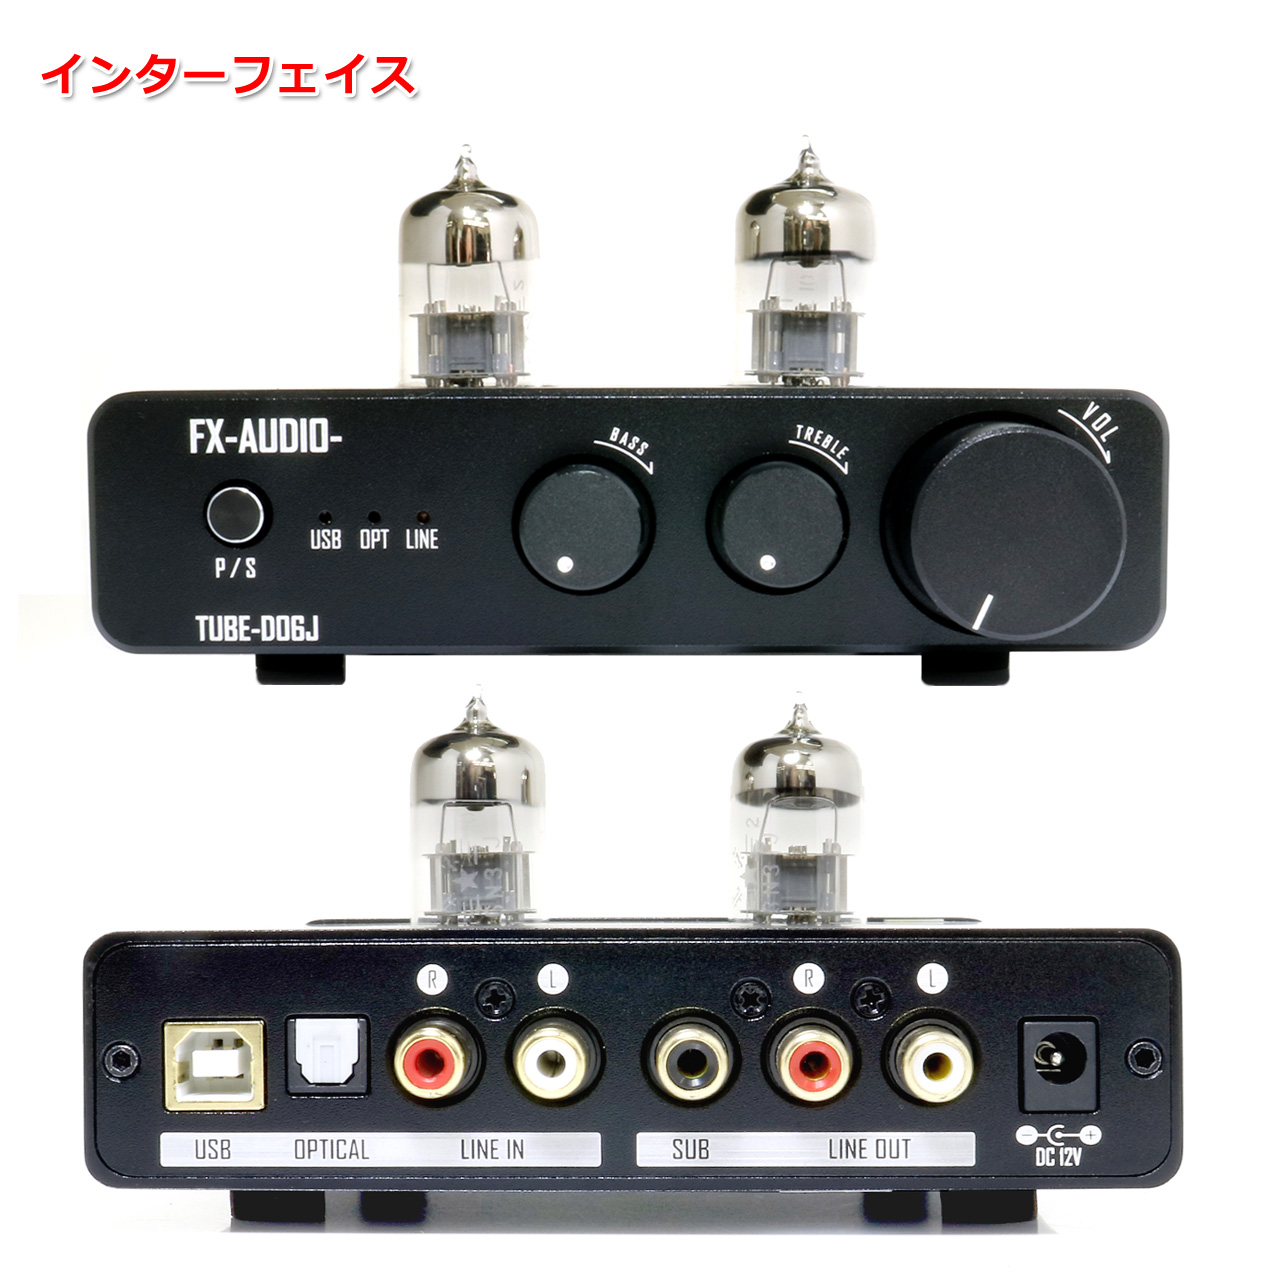 FX-AUDIO- TUBE-D06J[ black ] high-res correspondence DAC installing vacuum tube pre-amplifier 2.1ch output subwoofer output terminal tone control function USB light analogue 3 system input 